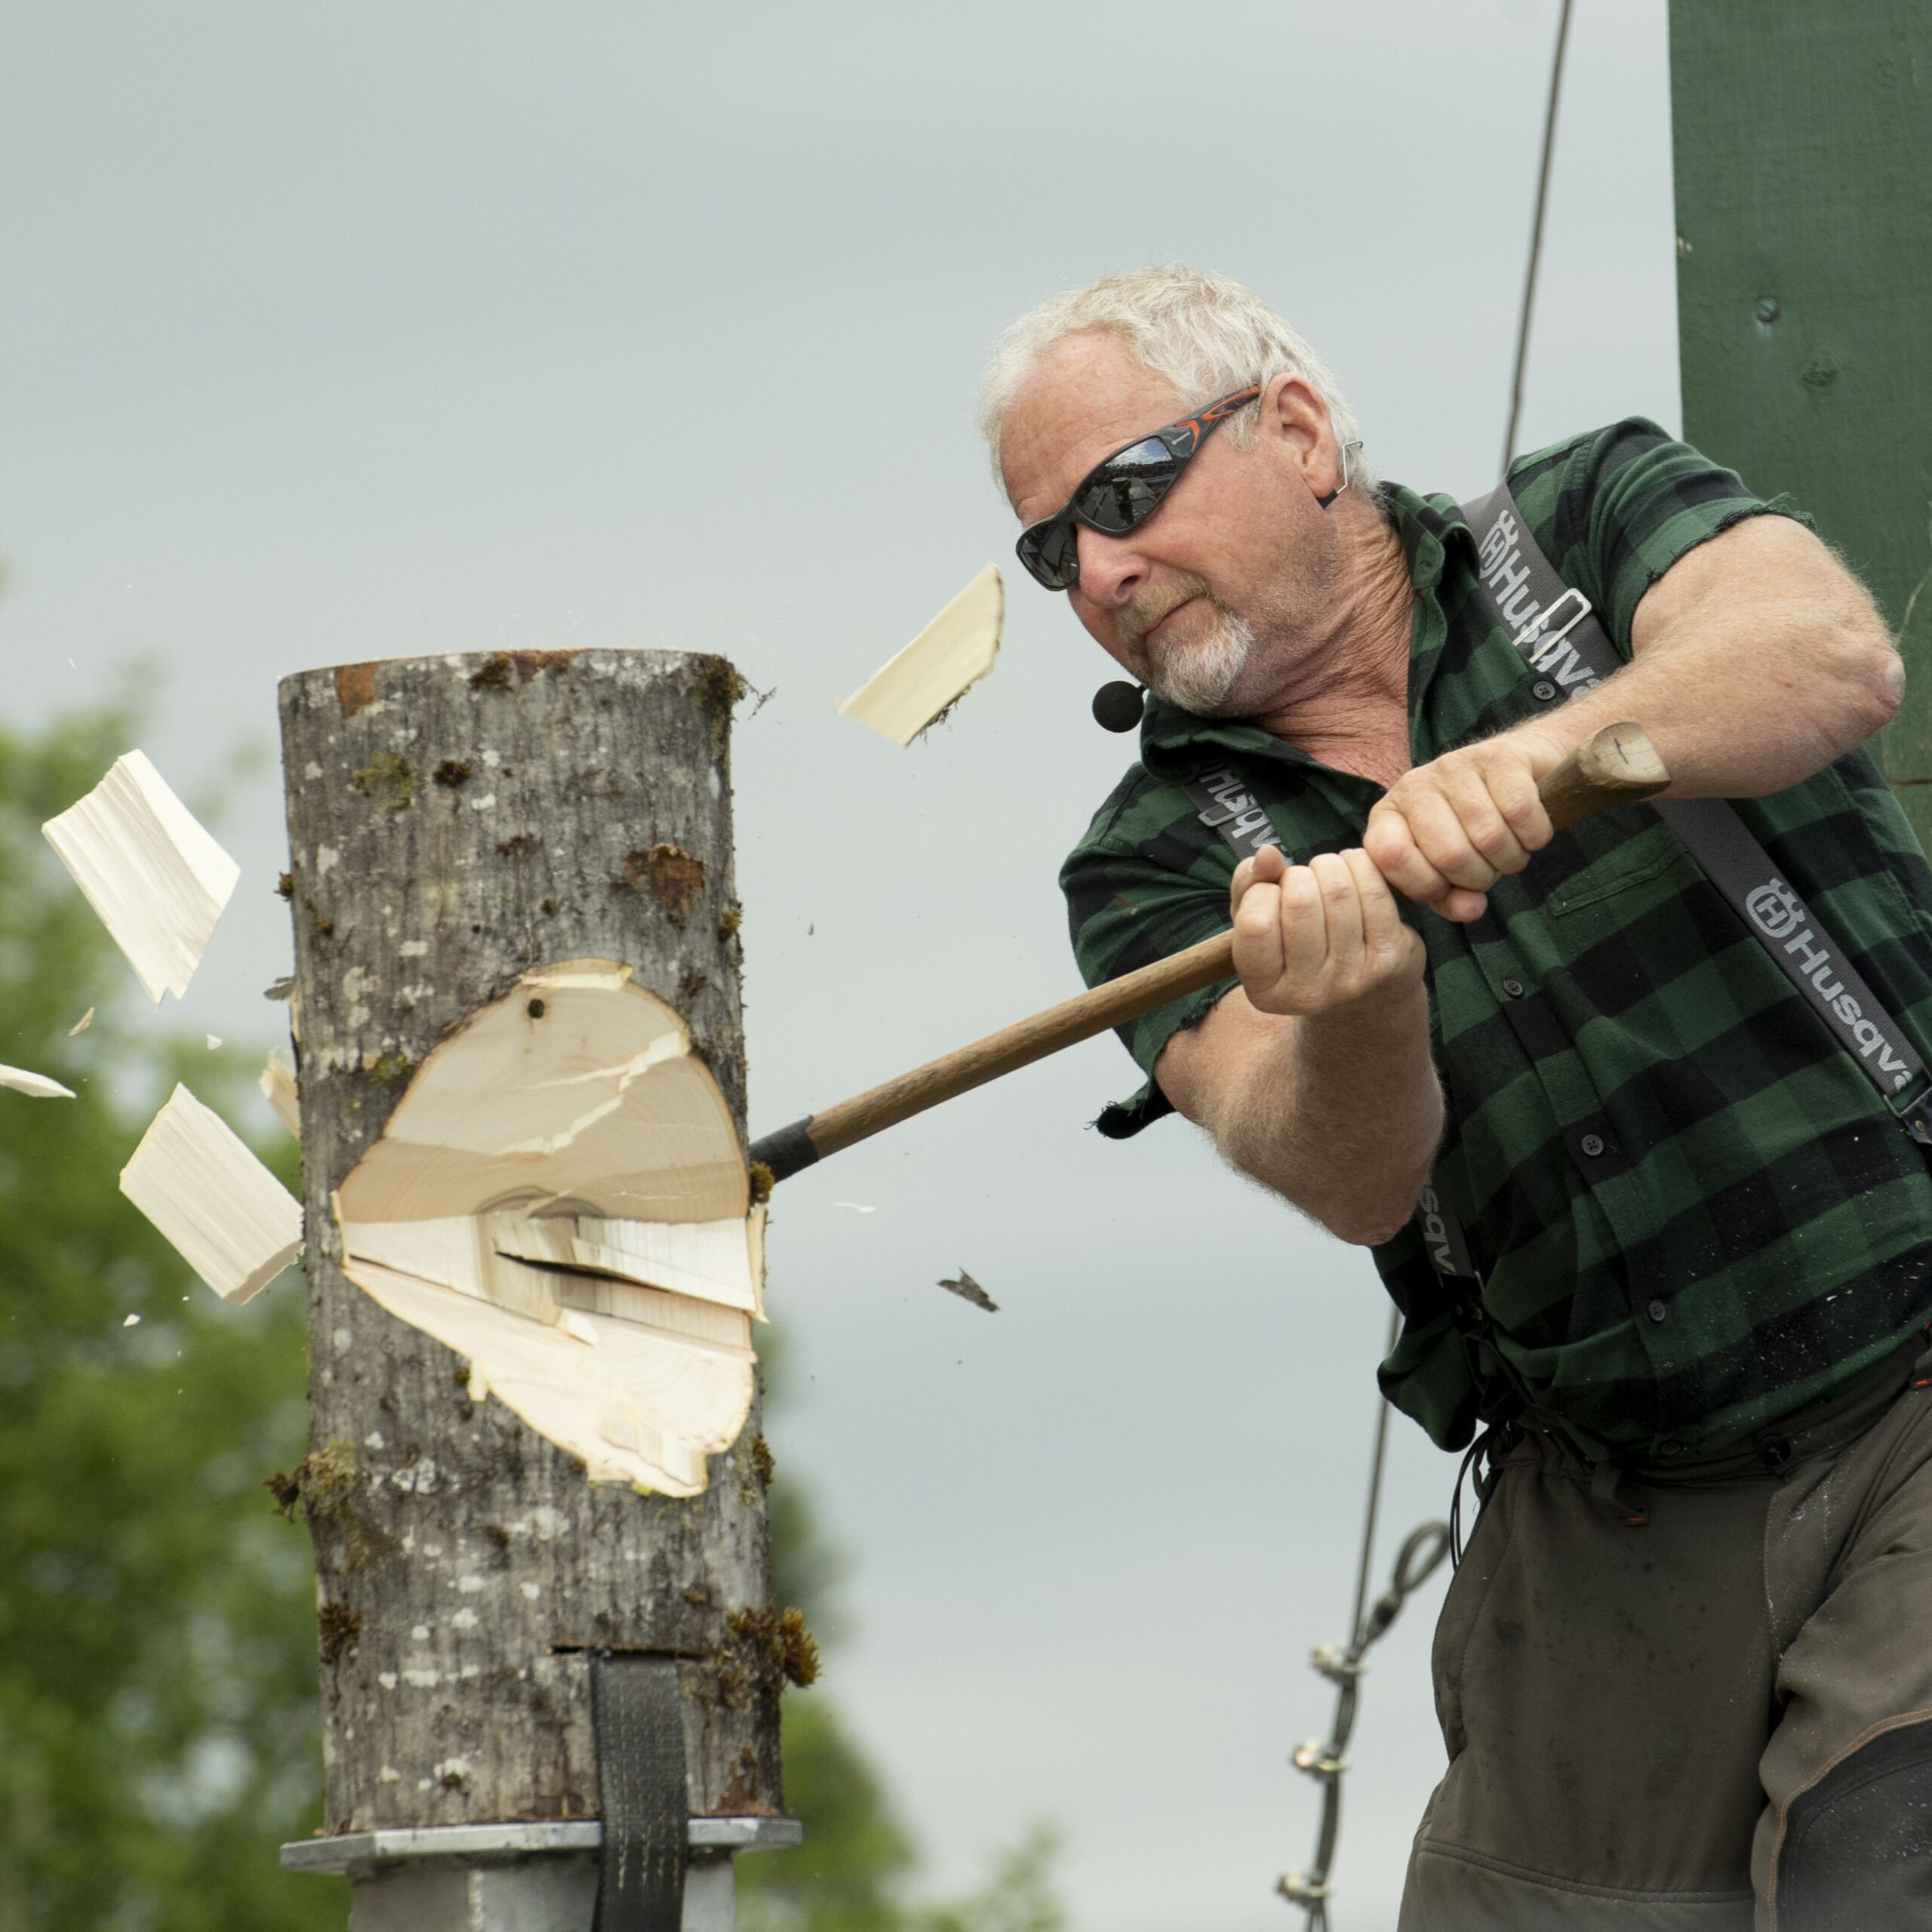 Lumberjack chopping with na axe - at the Cloverdale Rodeo & Country Fair